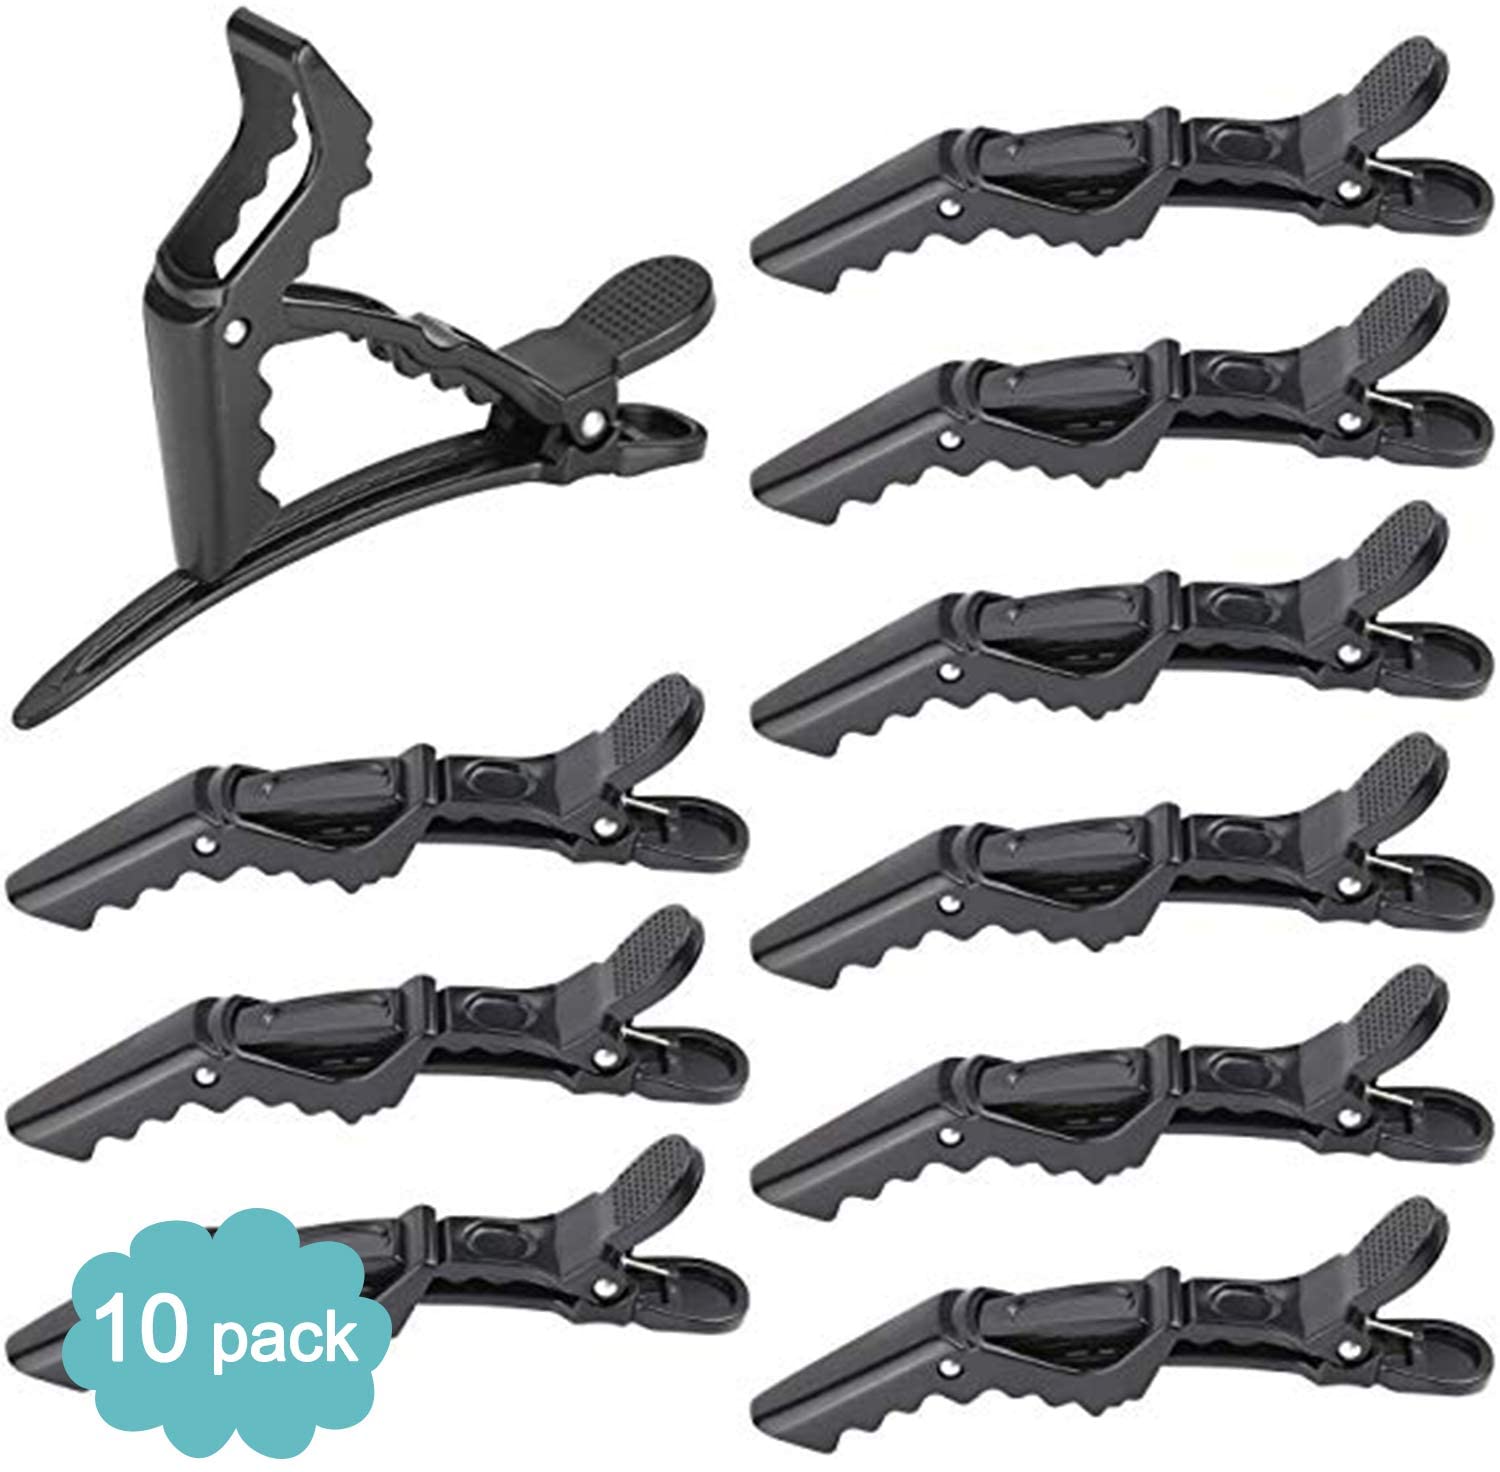 Sectioning Clips Hairdressing 10pcs,AOBETAK Crocodile Plastic Hair Clamp Barrettes with Nonslip Grip and Wide Teeth for Women And Girls, for Thick Hair Dressing Styling Salon Section, Black